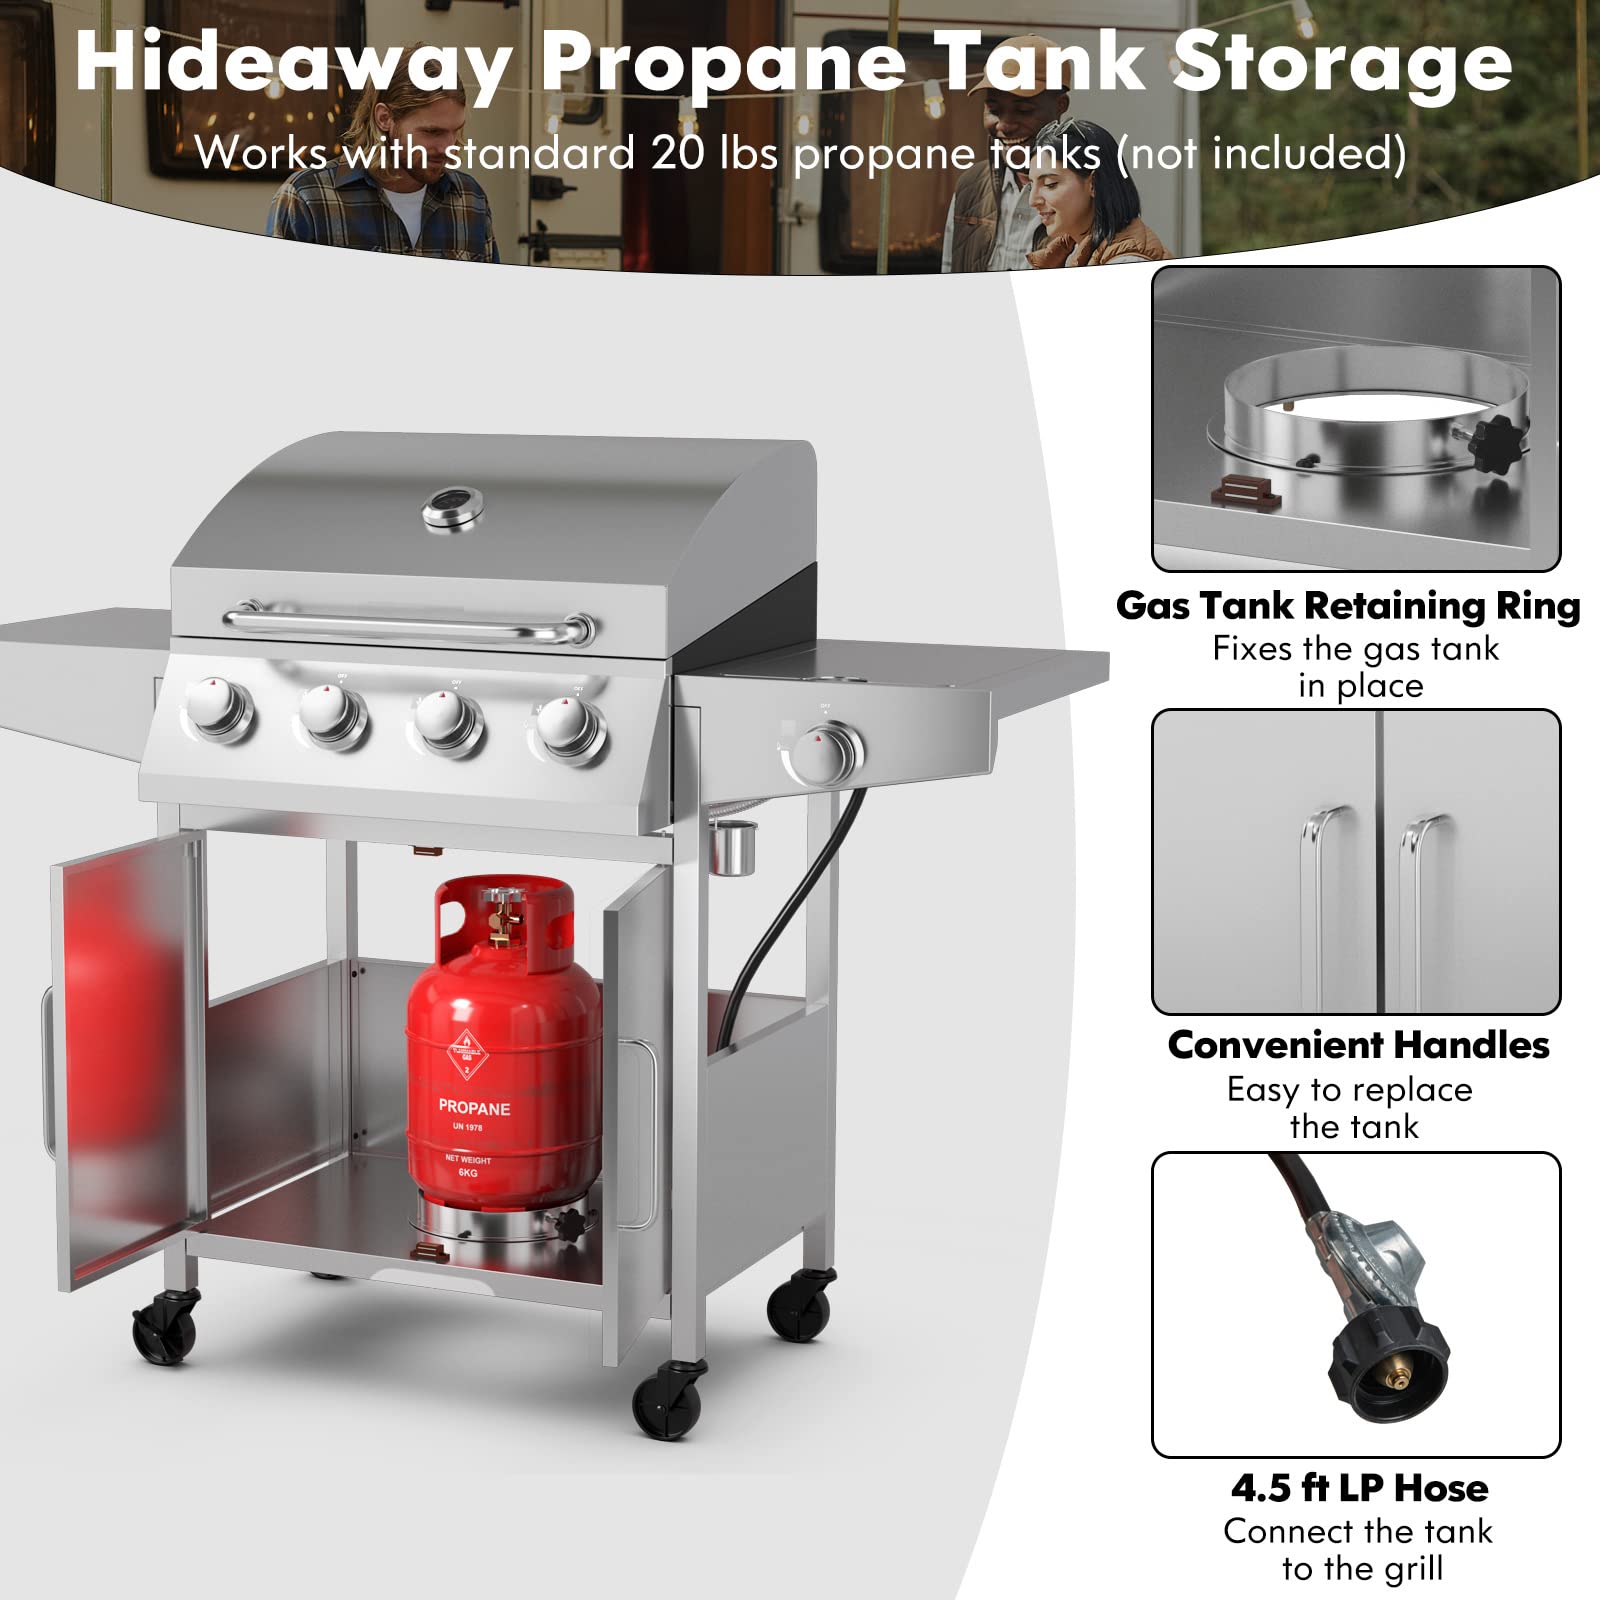 Giantex Propane Gas Grill with 4 Main Burners and Side Burner, total 50,000 BTU